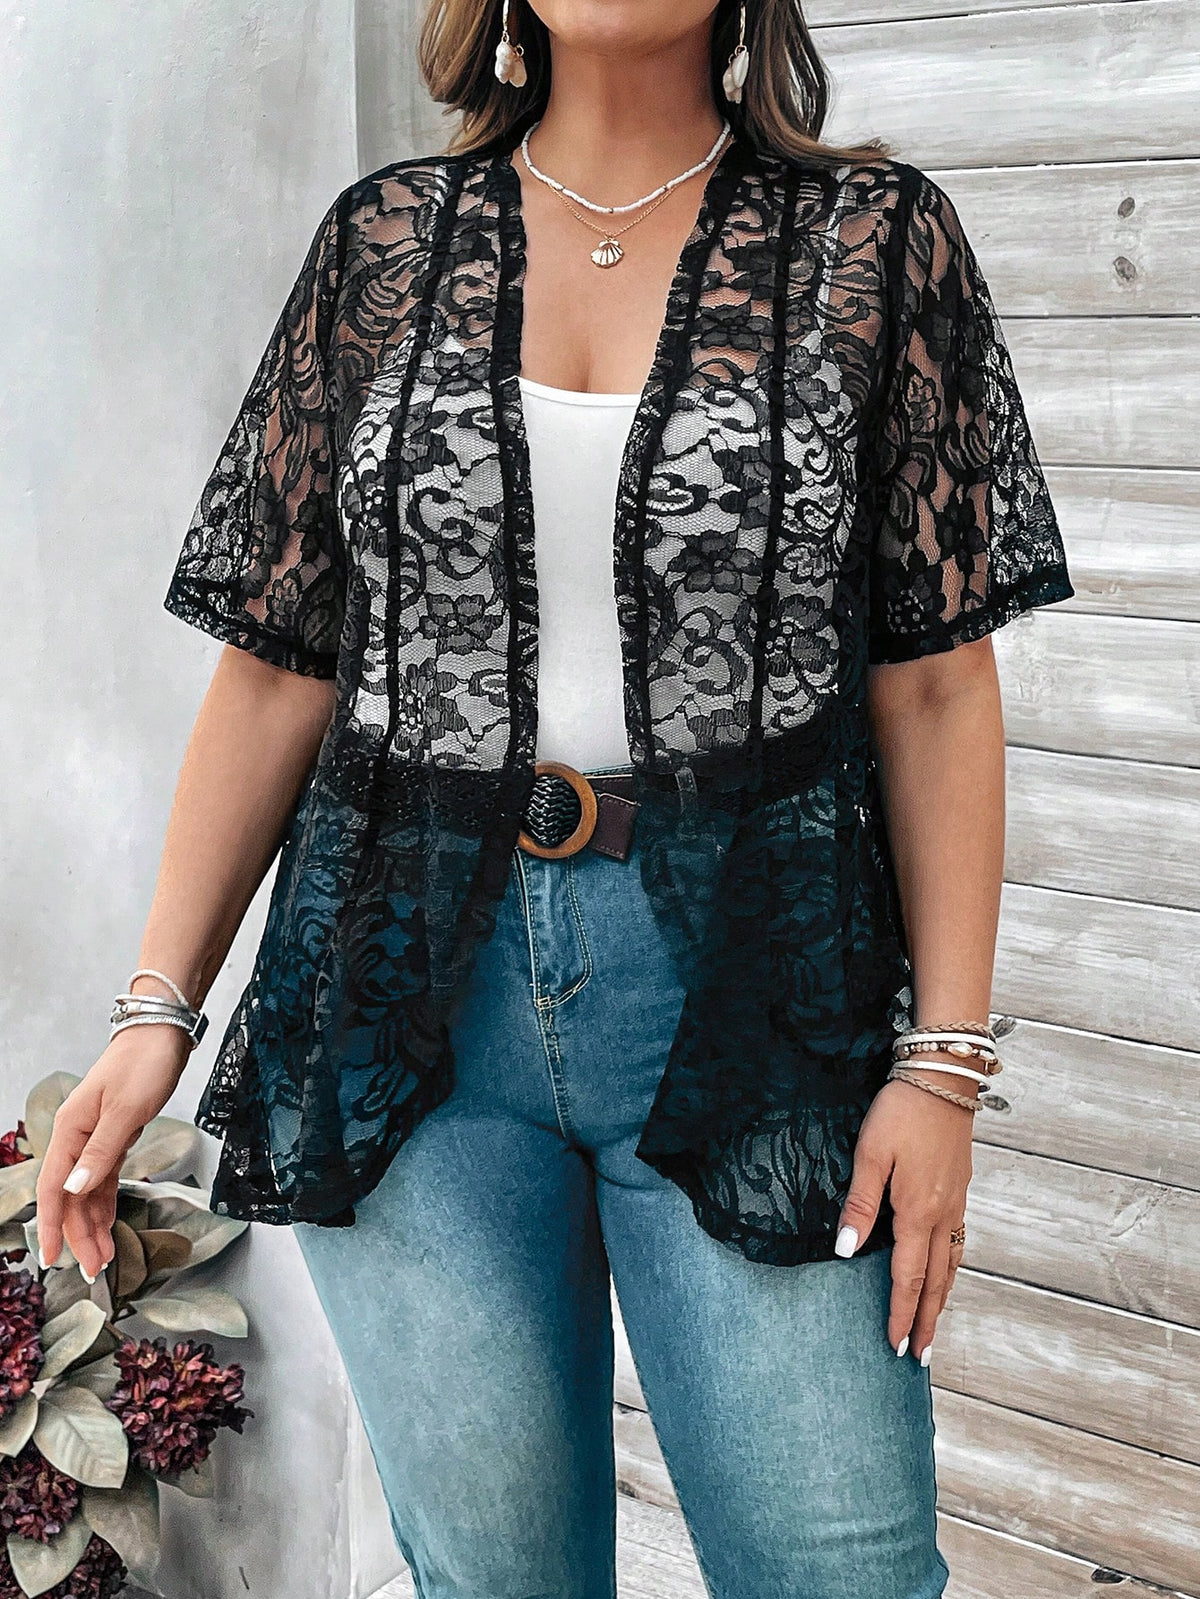 EMERY ROSE Plus Size Women'S Lace Open Front Cardigan For Spring